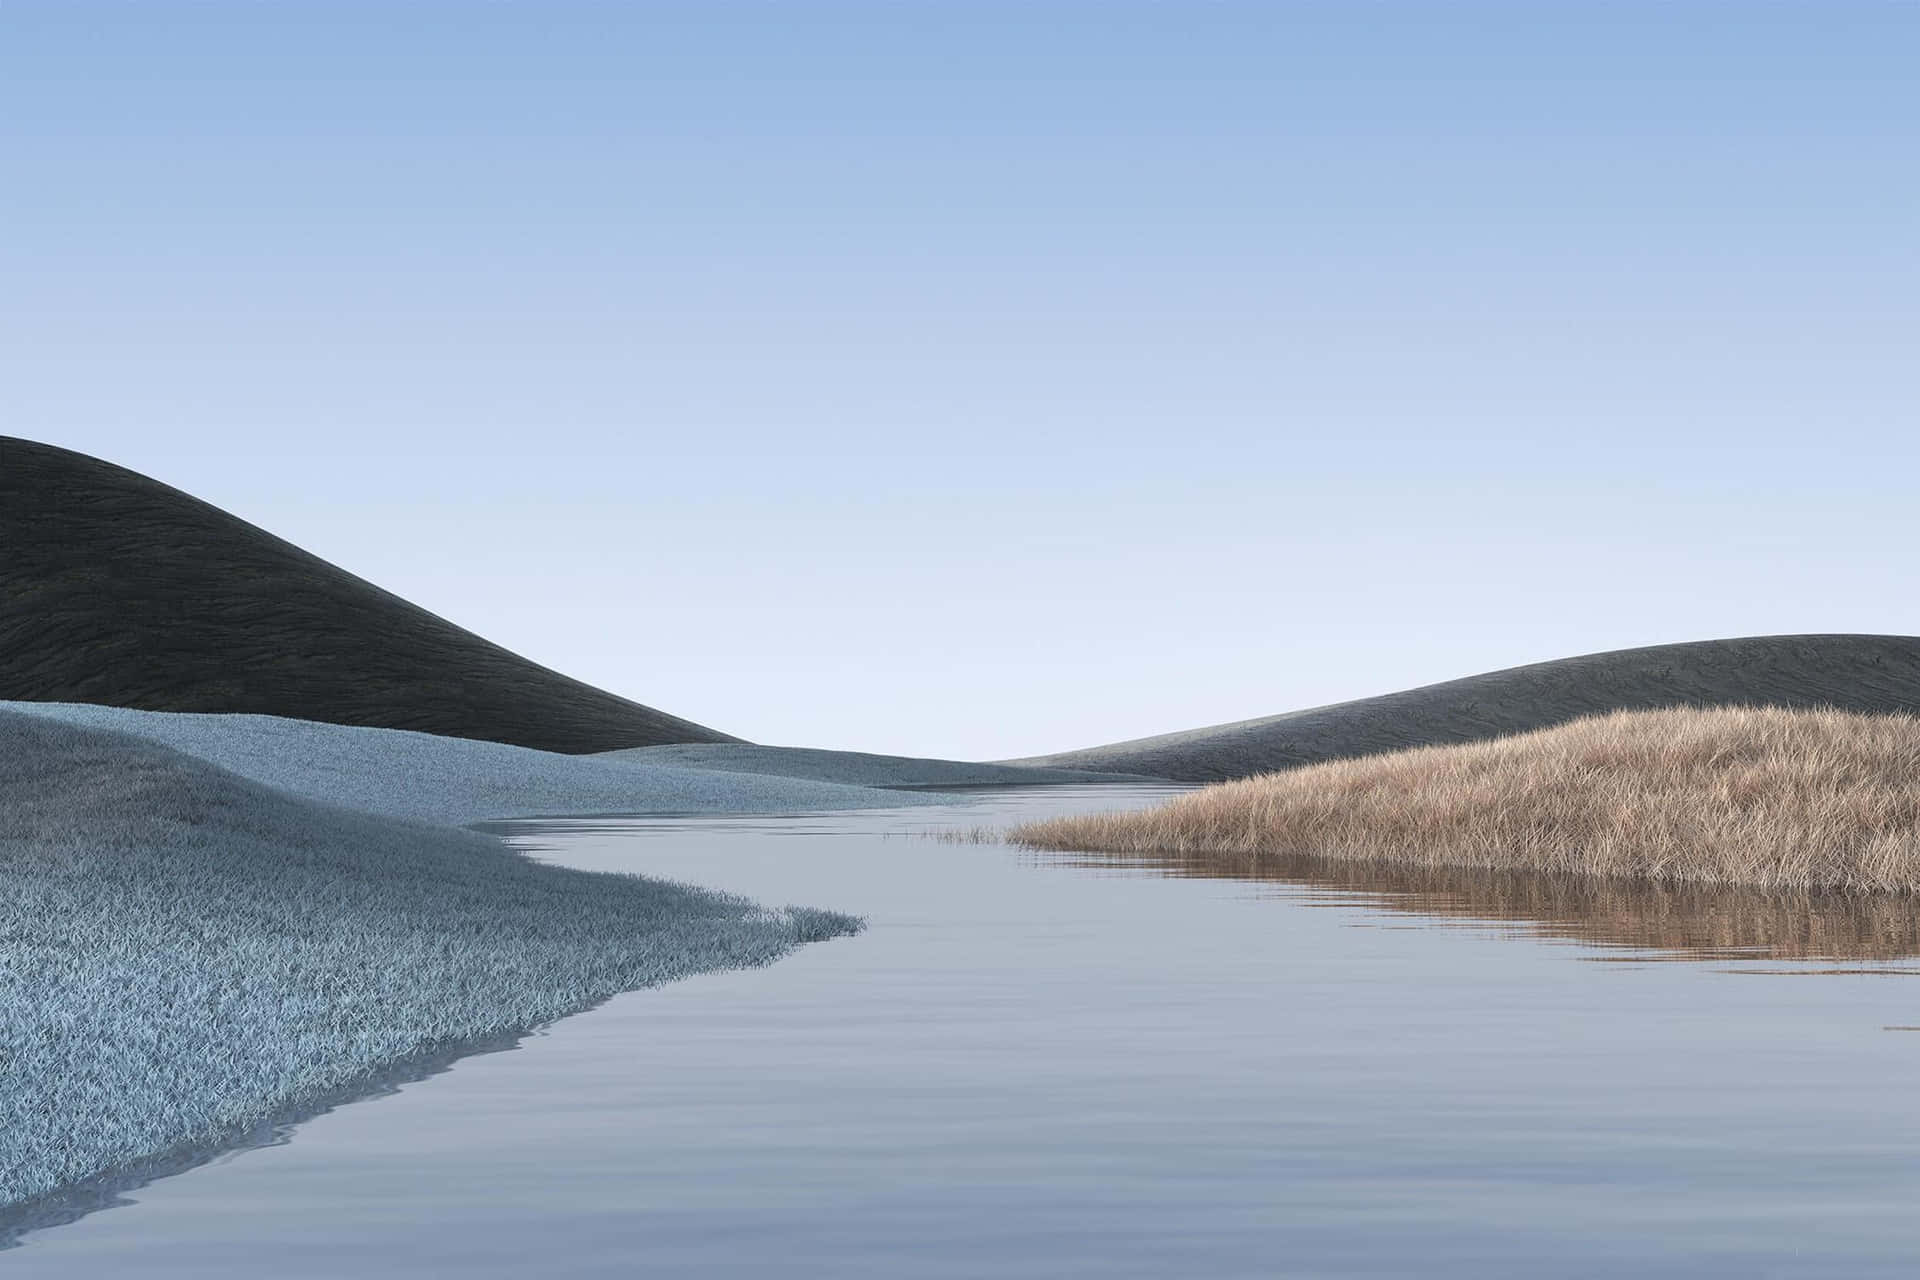 A 3d Rendering Of A River With Grass And Hills